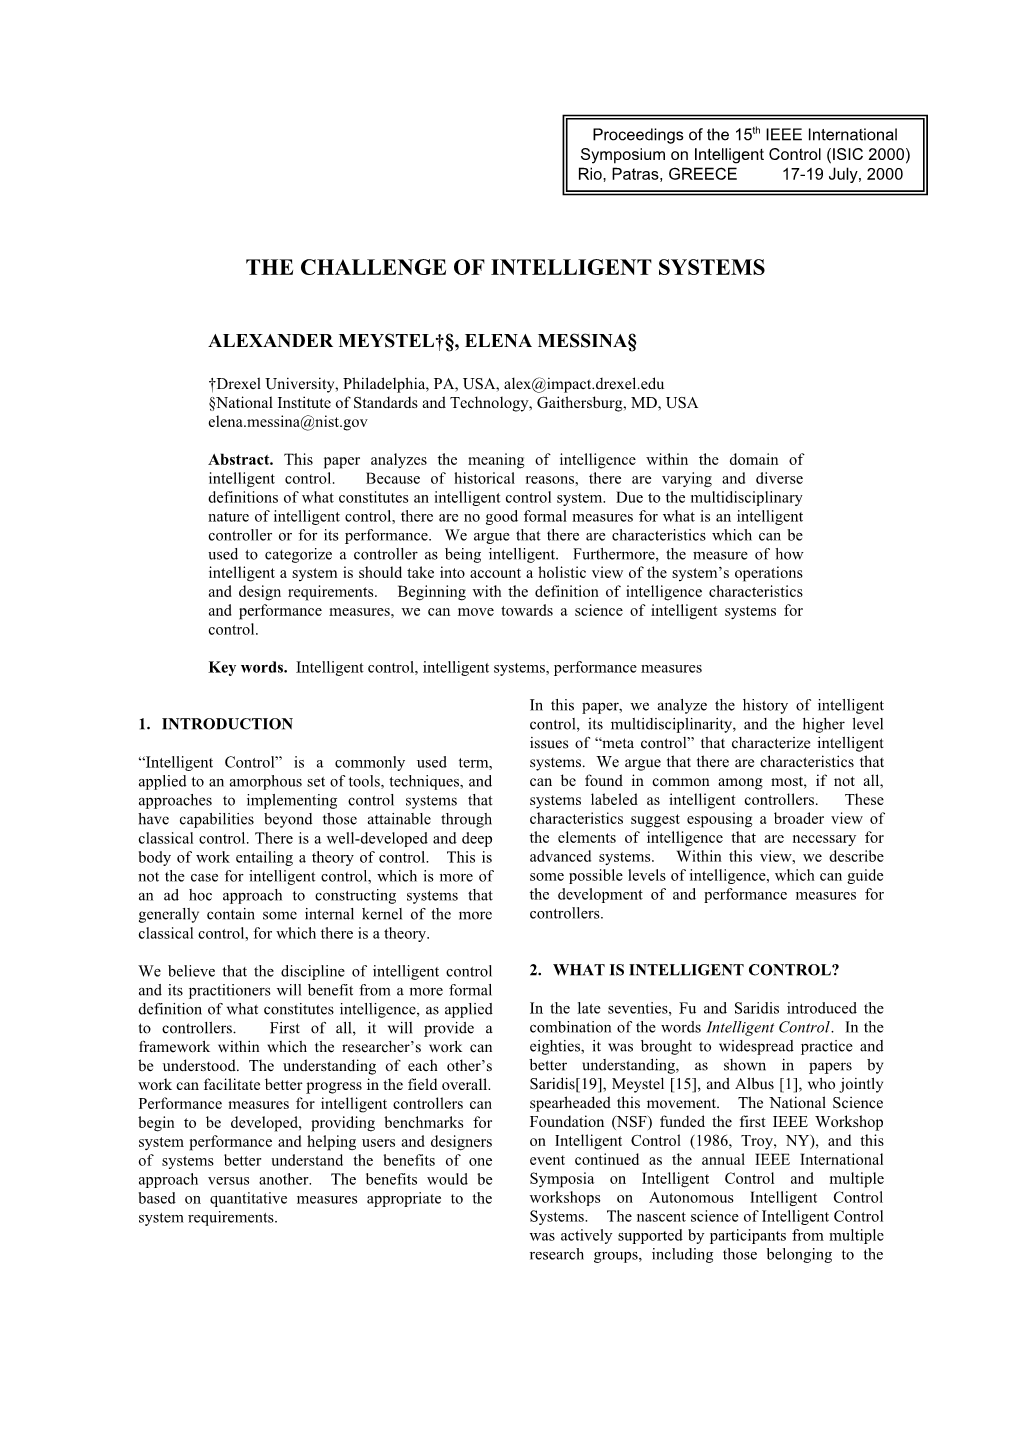 The Challenge of Intelligent Systems